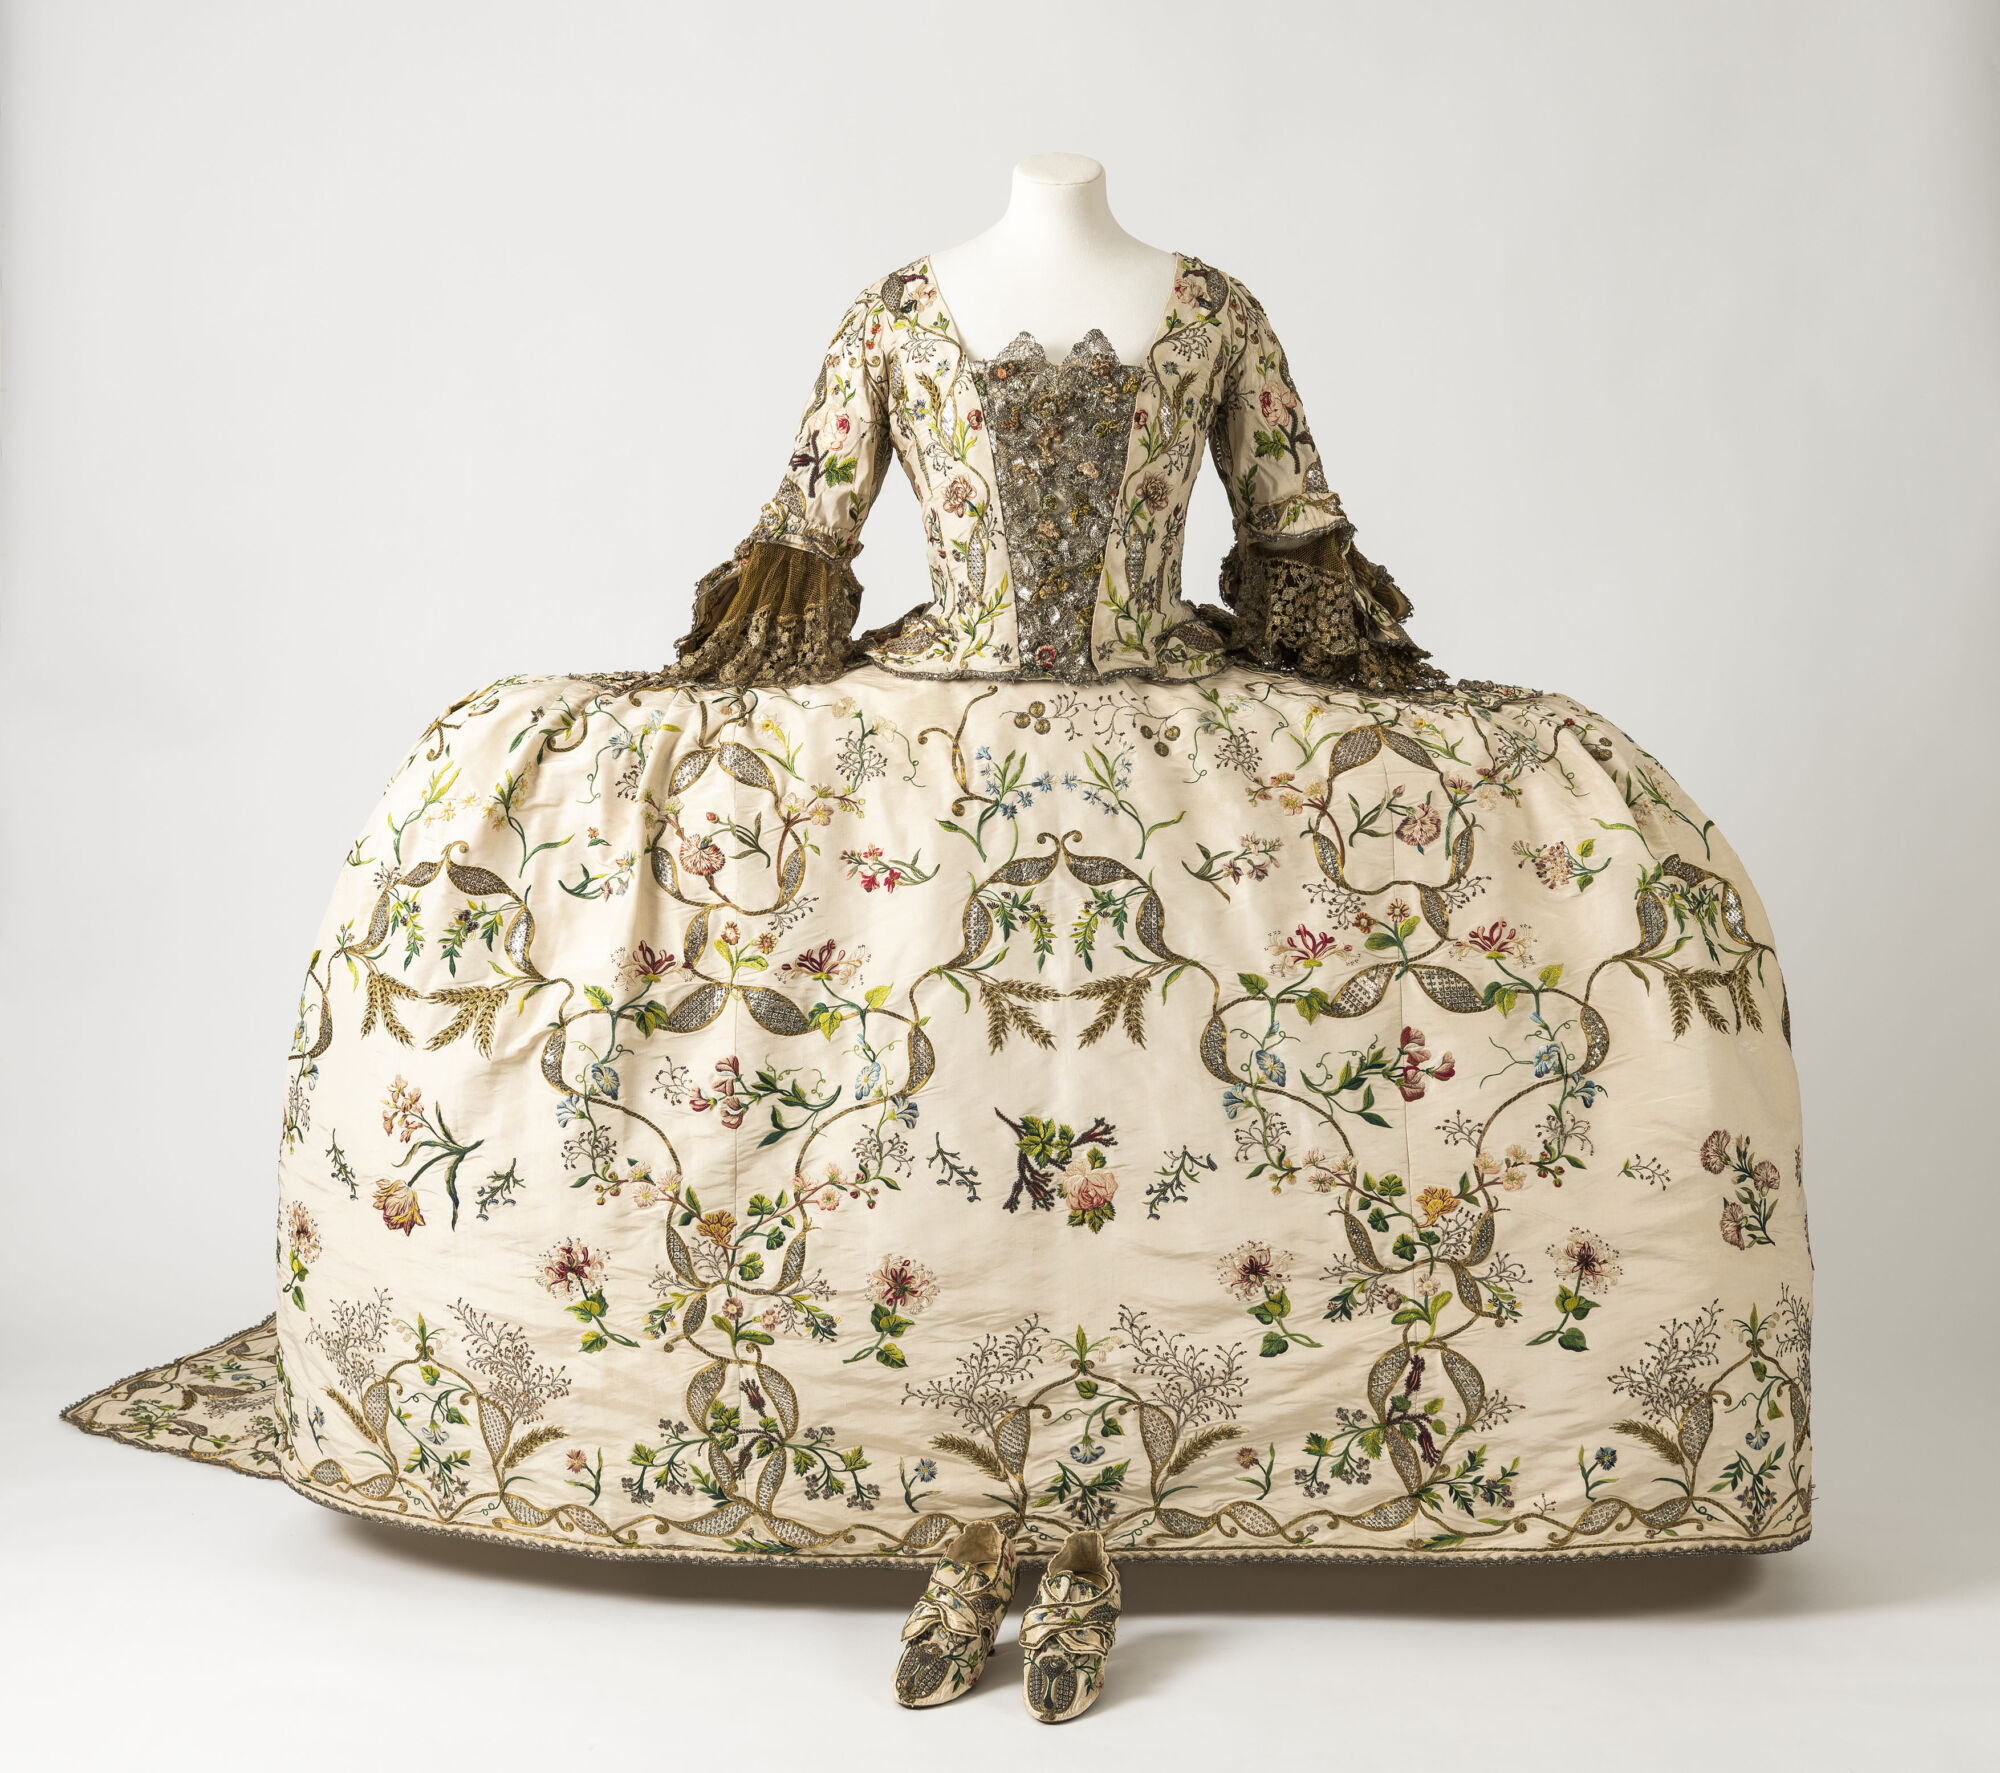 The Wick - British, Court dress (gown, petticoat, stomacher and shoes), c.1740–60.
© Fashion Museum Bath